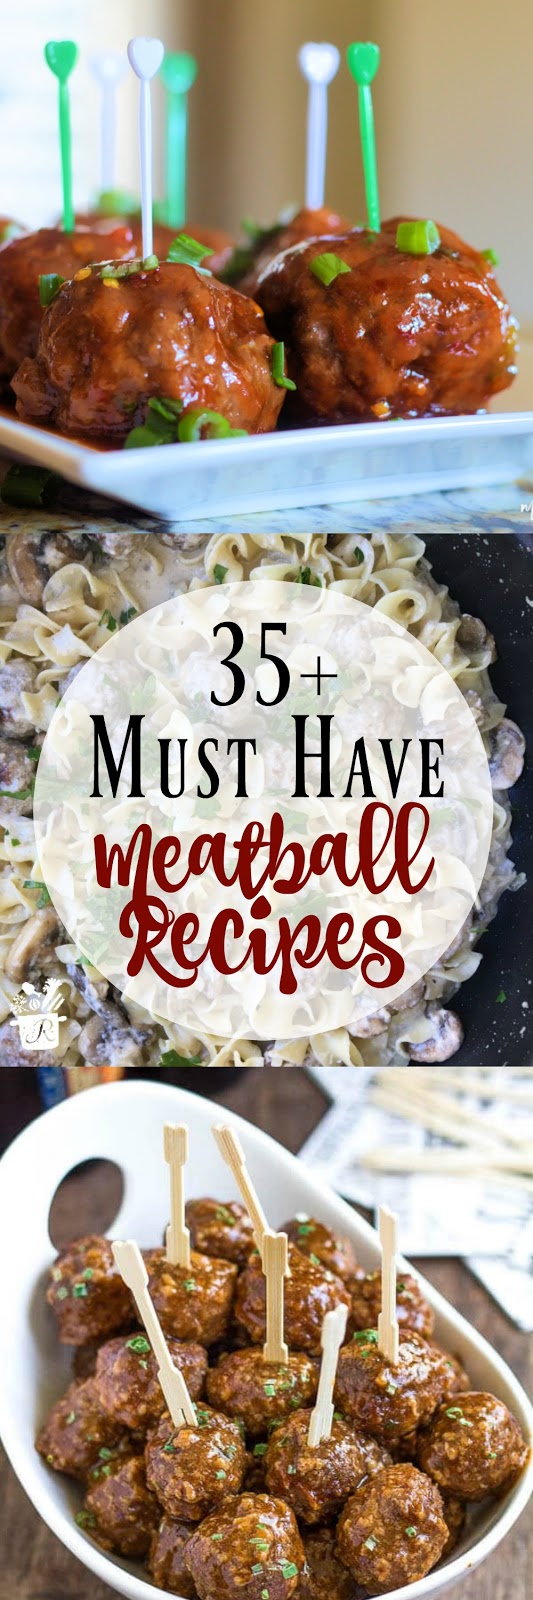 35+ Must Have Meatball Recipes...every meatball under the sun!  From traditional meatballs in red sauce to chicken variations slathered in buffalo sauce to veggie loaded turkey meatballs.  You will definitely find a meatball you want to try! (sweetandsavoryfood.com)